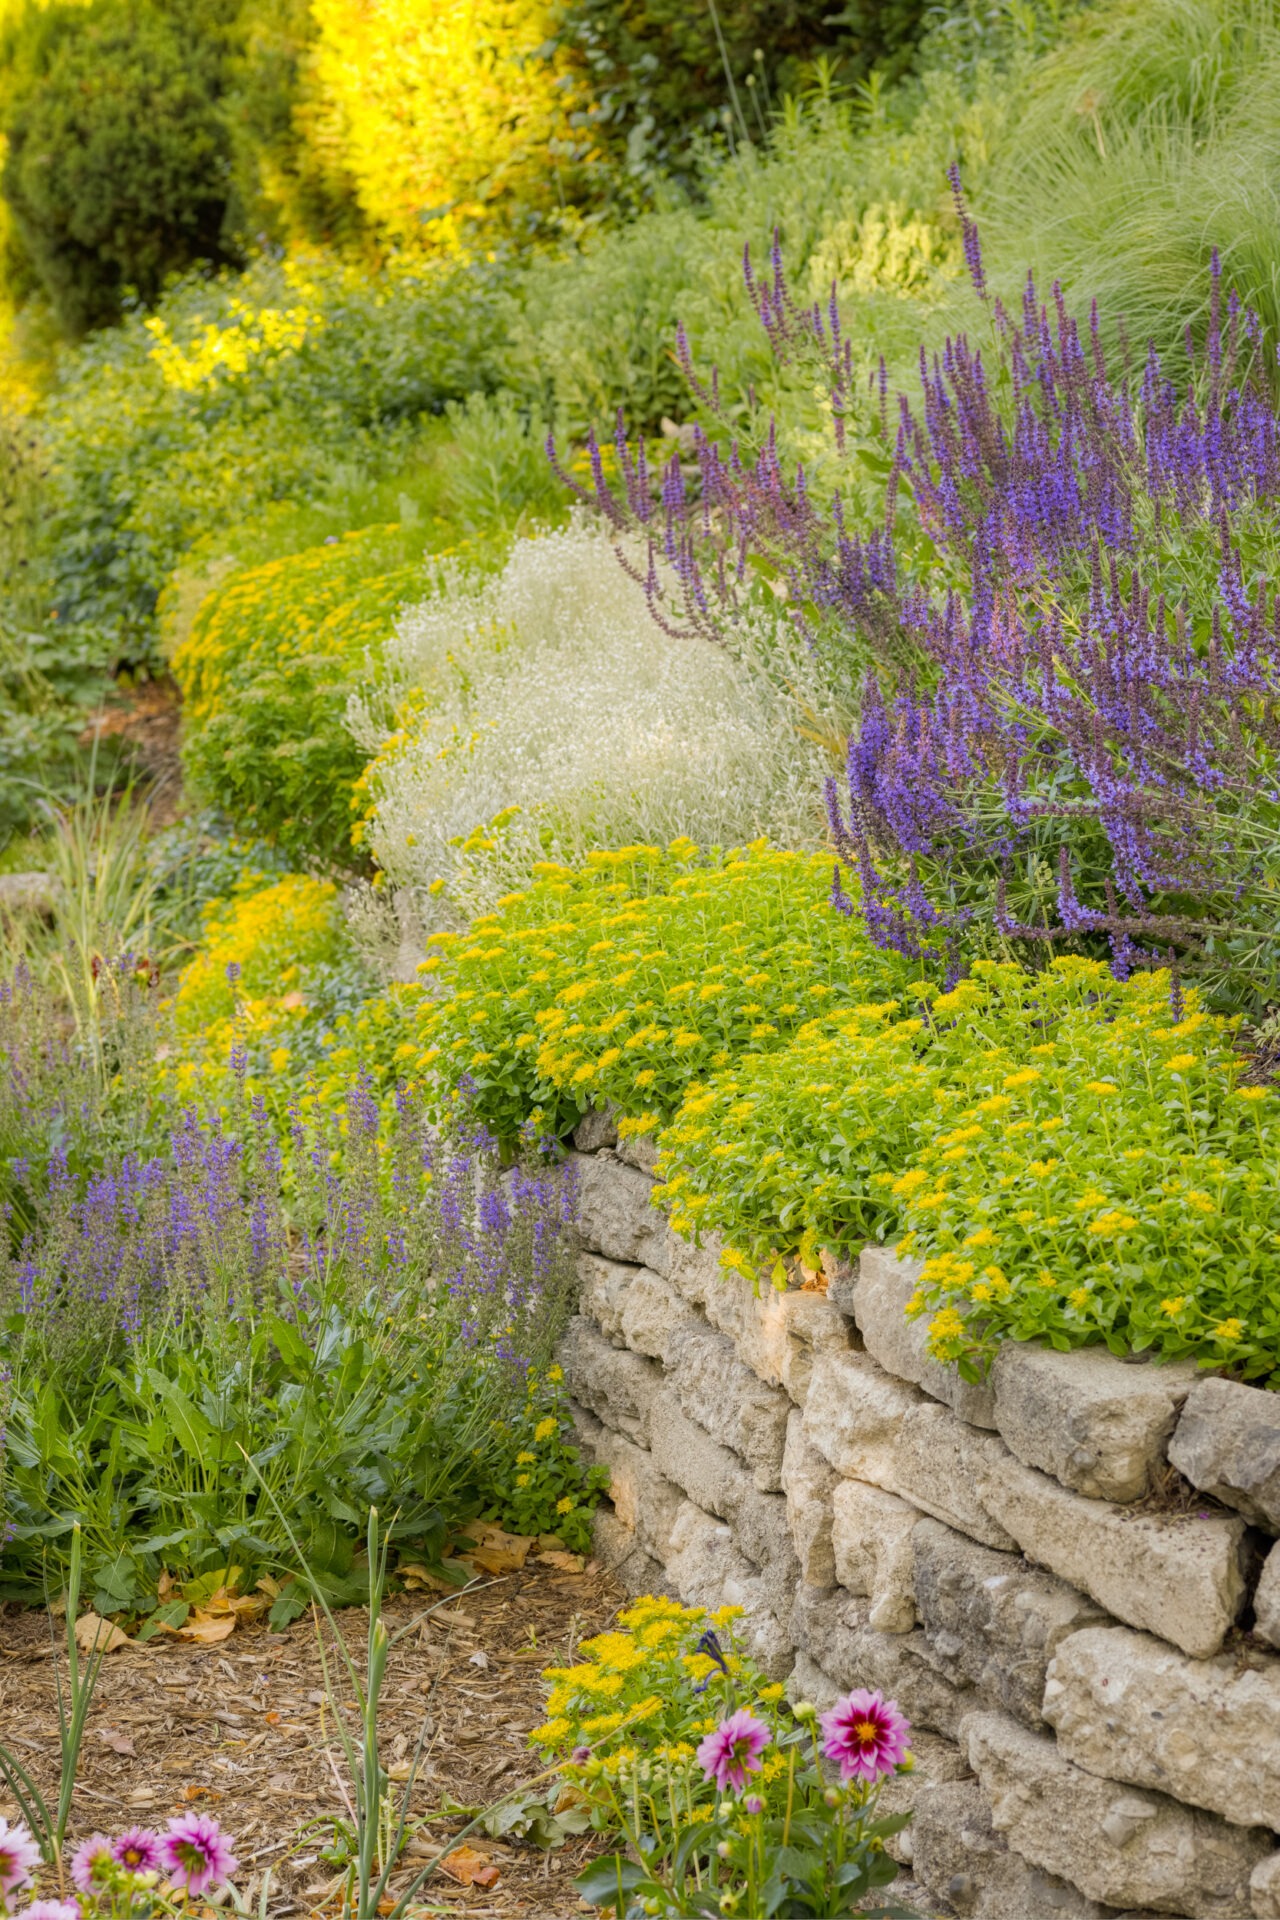 A vibrant garden with layers of flowering plants in yellows, purples, and greens terraced by a rustic stone wall. Bright foliage textures complement the blossoms.